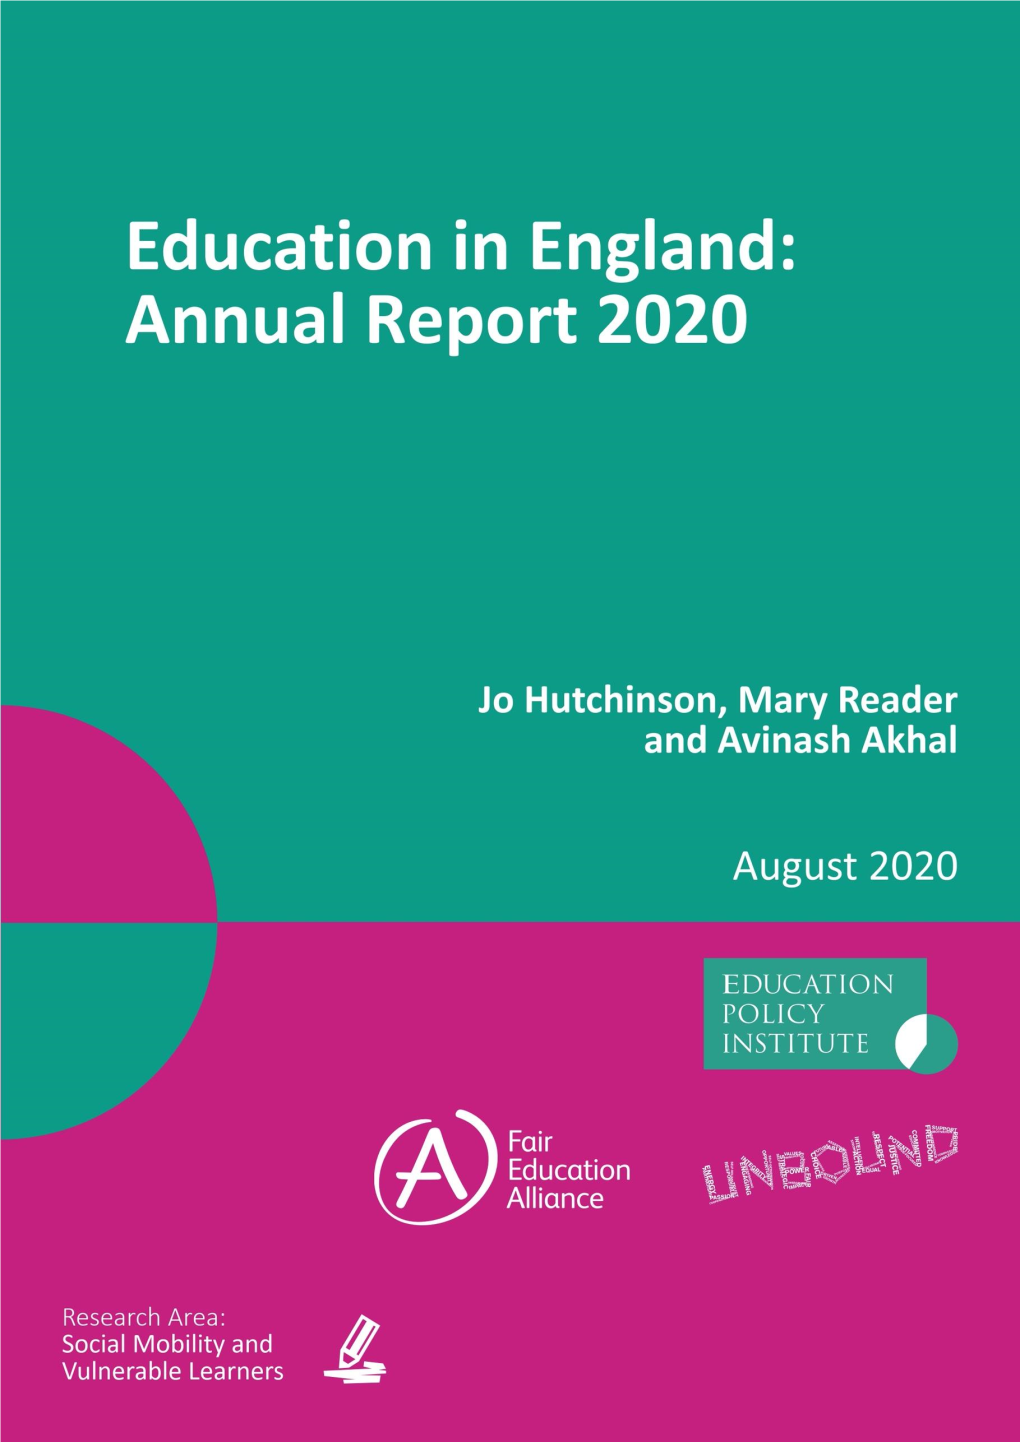 Education in England: Annual Report 2020